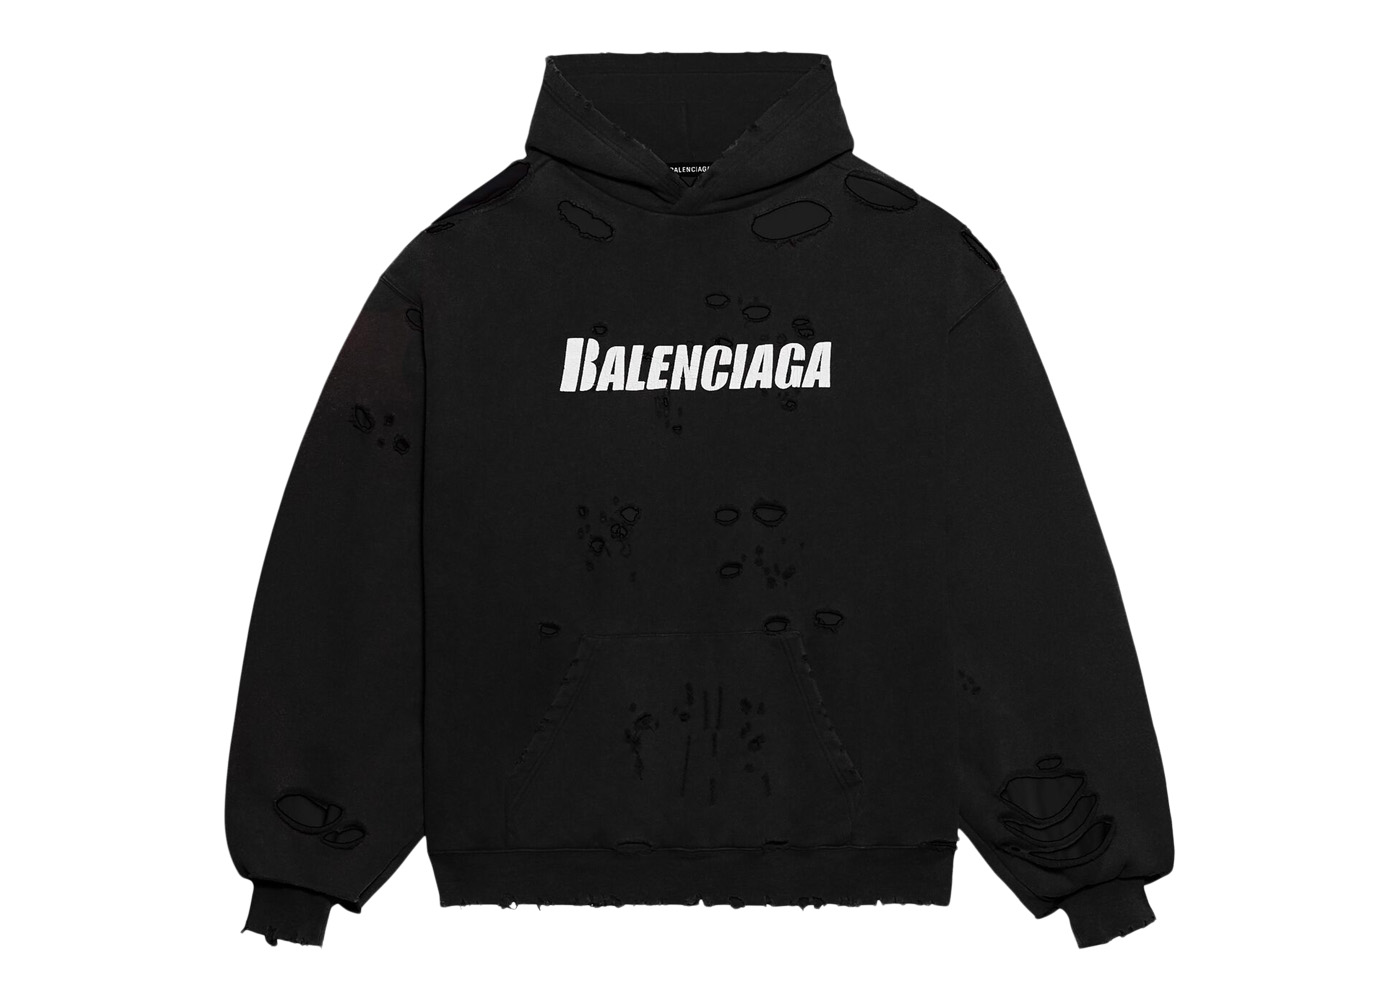 Balenciaga Caps Destroyed Oversize Fit Hoodie Black/White